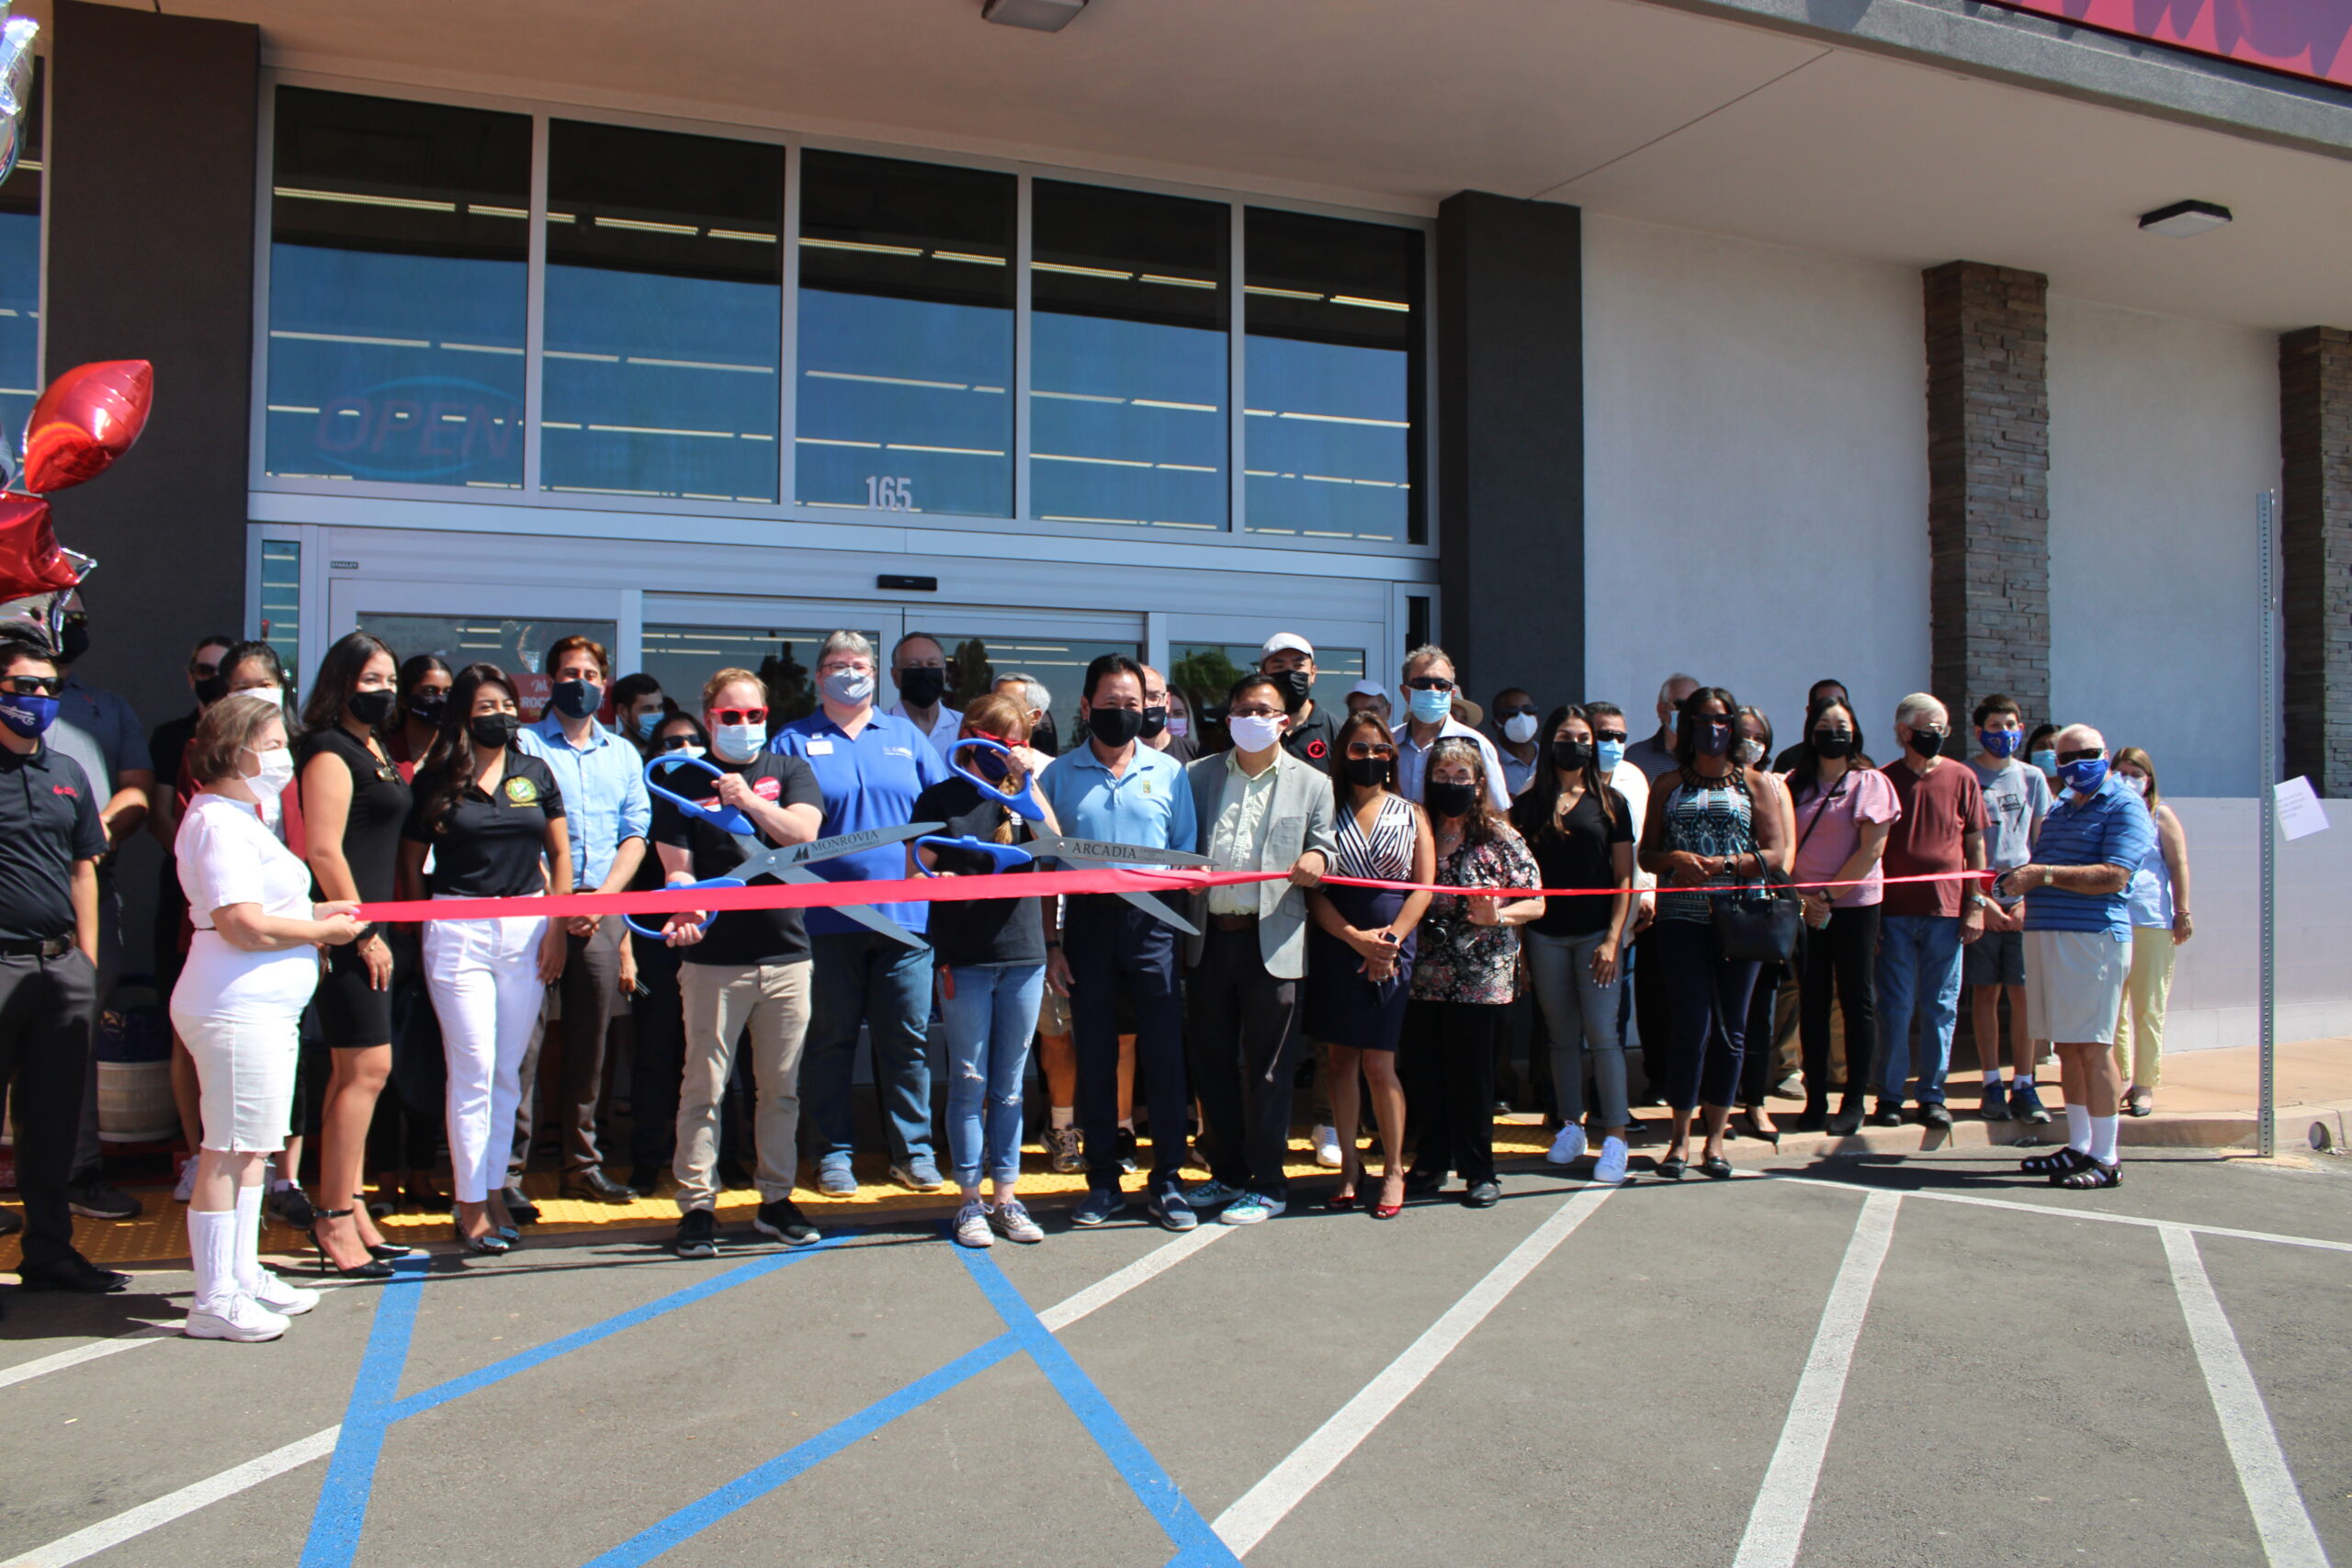 Grocery Outlet Foothill Ribbon Cutting ceremony showing a line of people with a red ribbon